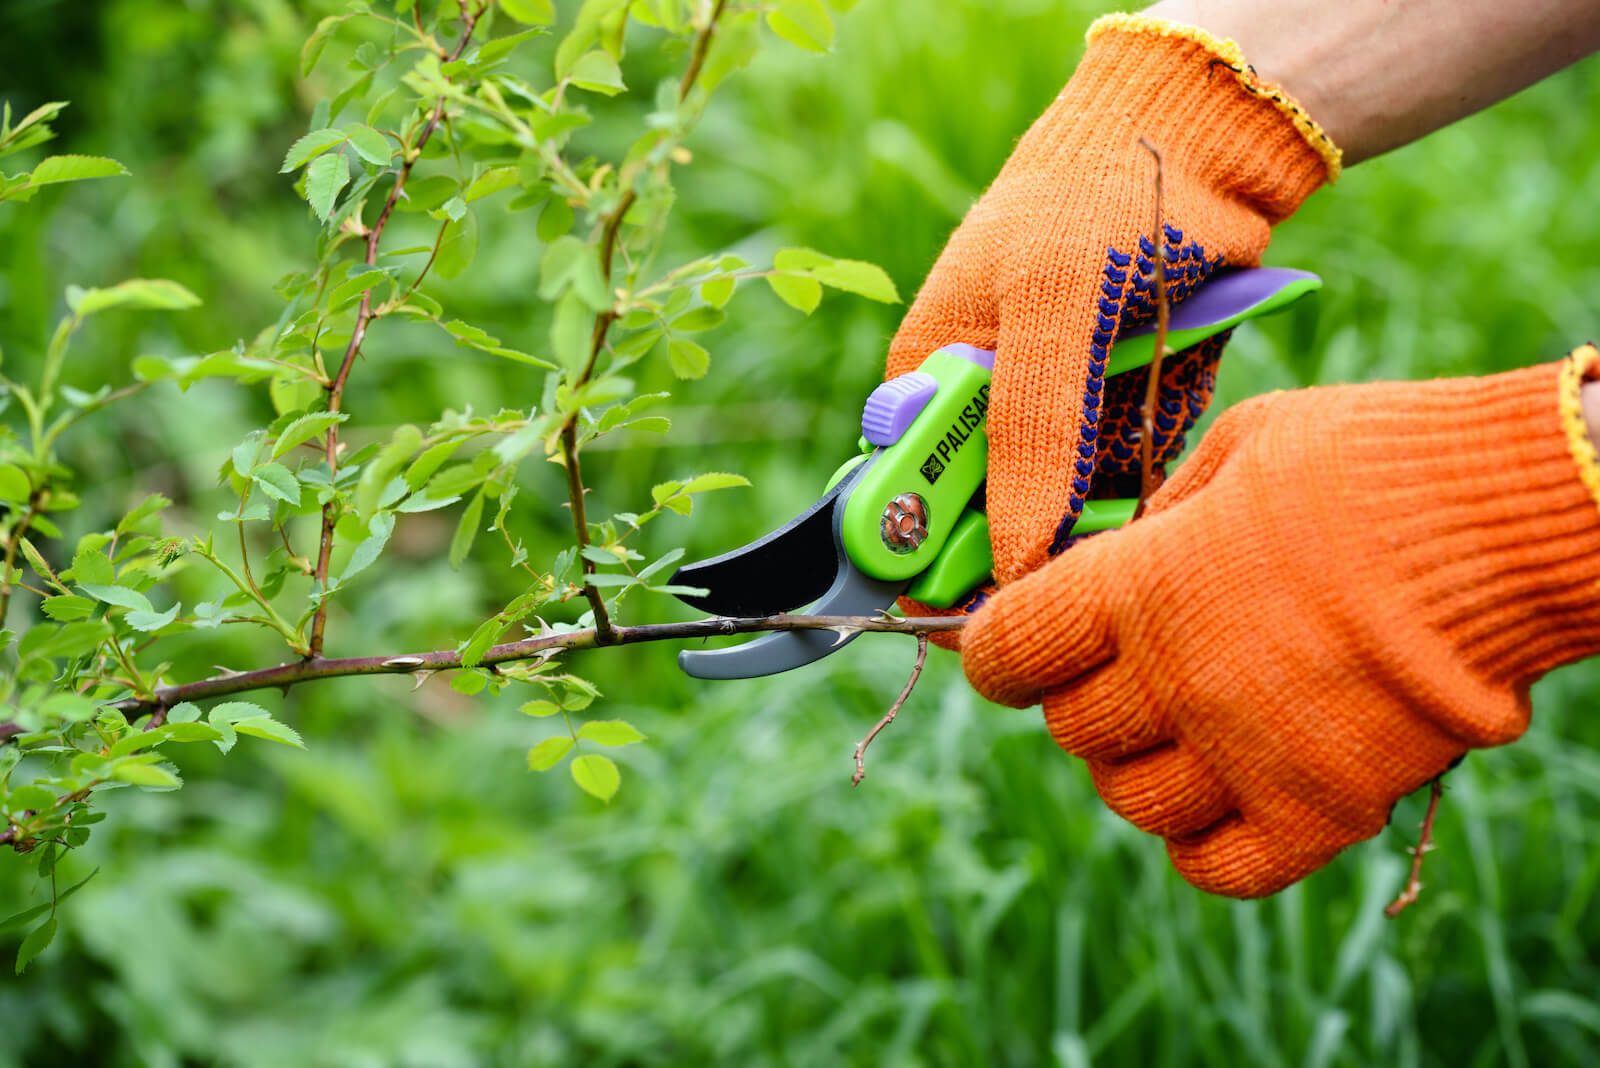 A person is cutting a branch from a plant with a pair of scissors during autumn.